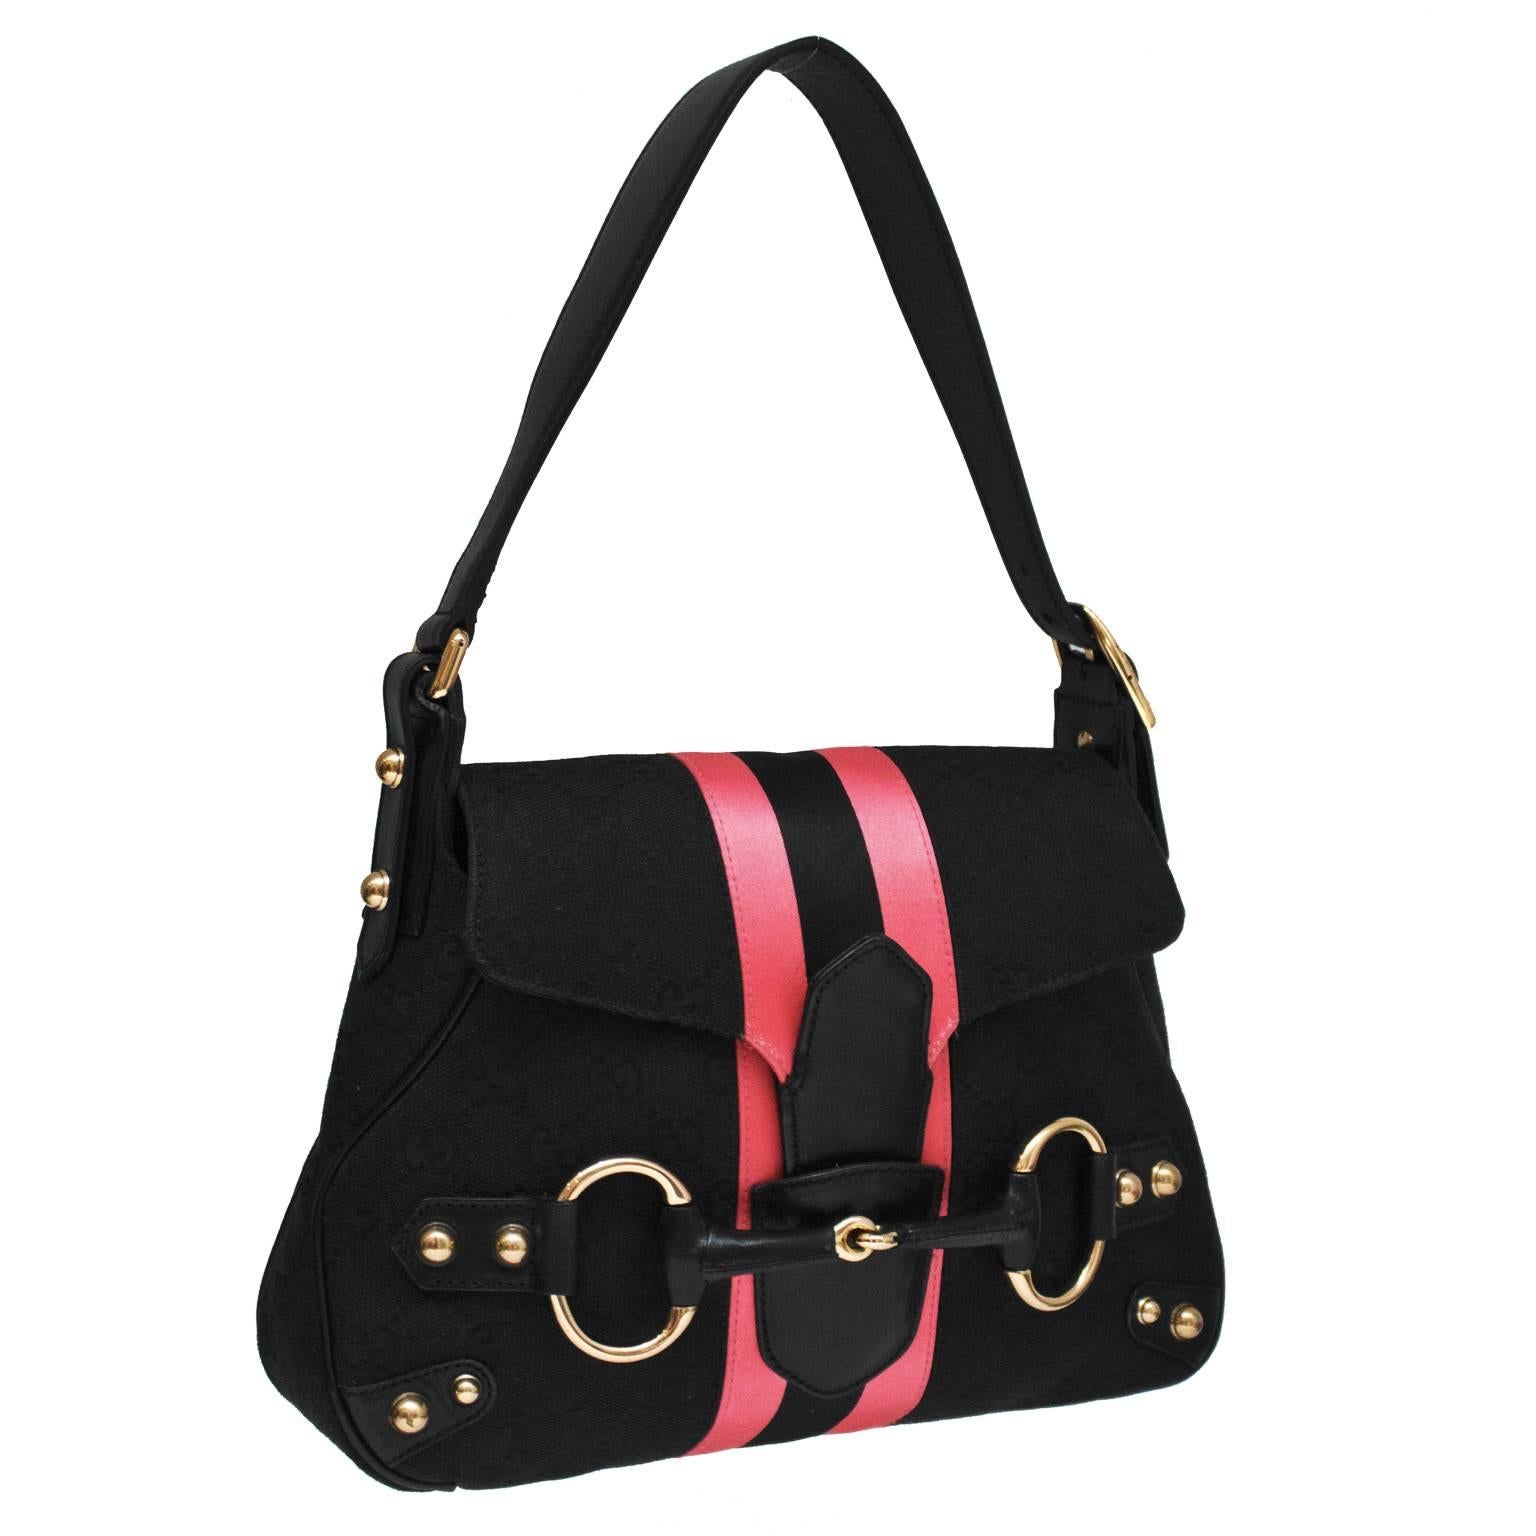 Gucci black canvas monogram mini saddle bag from the Tom Ford era. The bag features a pink and black satin strip down the center with rose gold hardware throughout. Top flap back closes with a leather tab insert and the front is adorned with a large